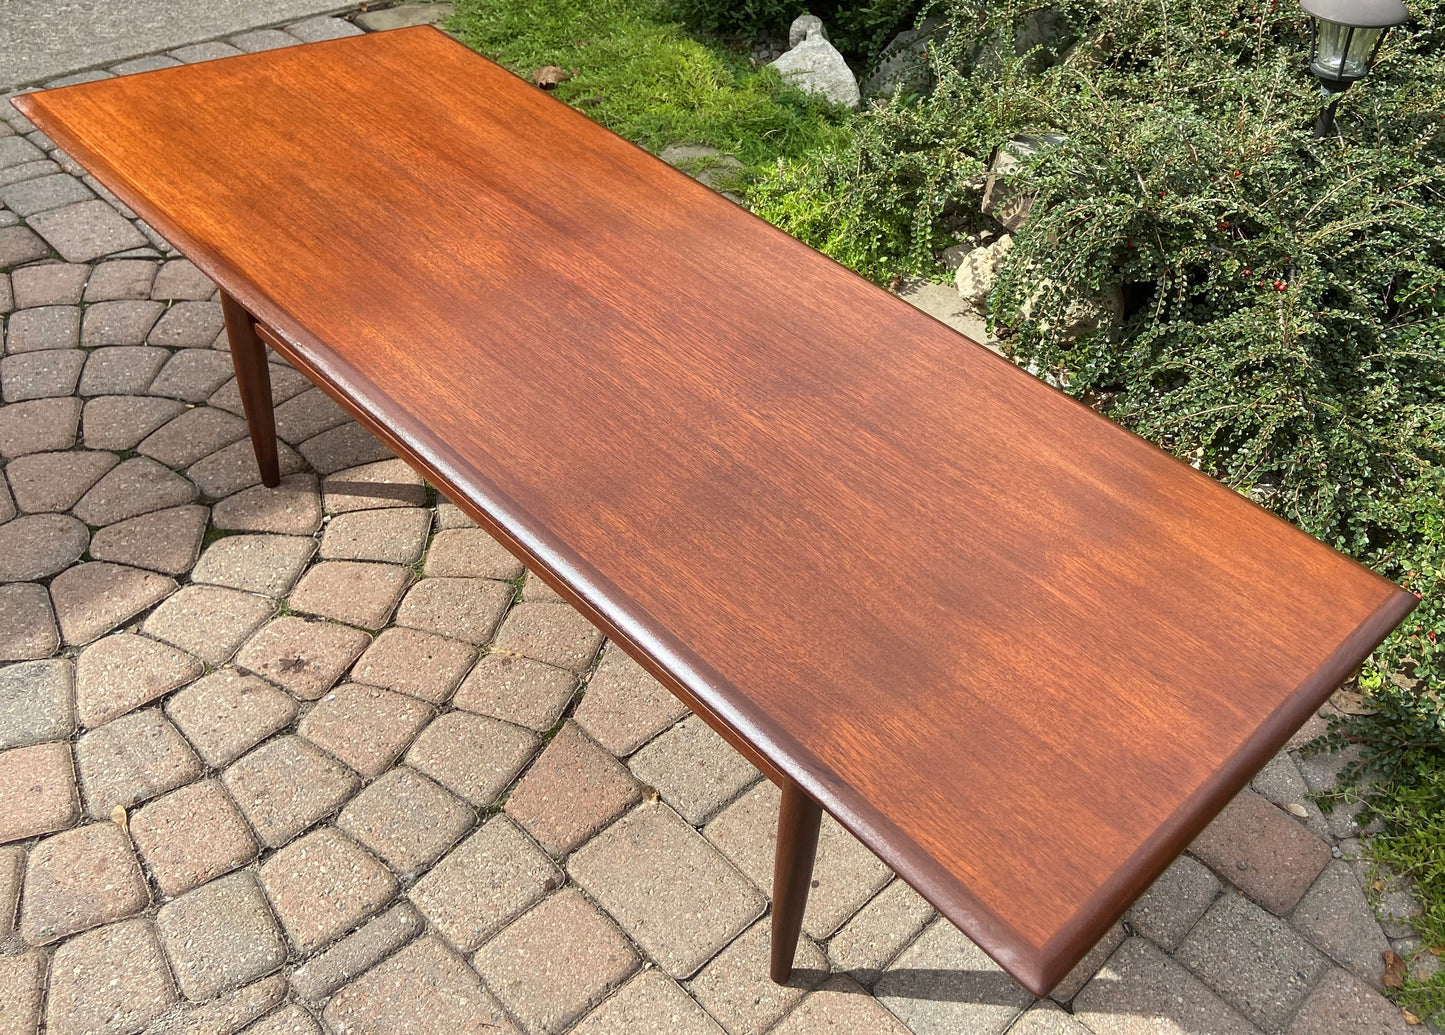 REFINISHED Mid Century Modern Teak Coffee Table with Shelf by RS Associates 6ft